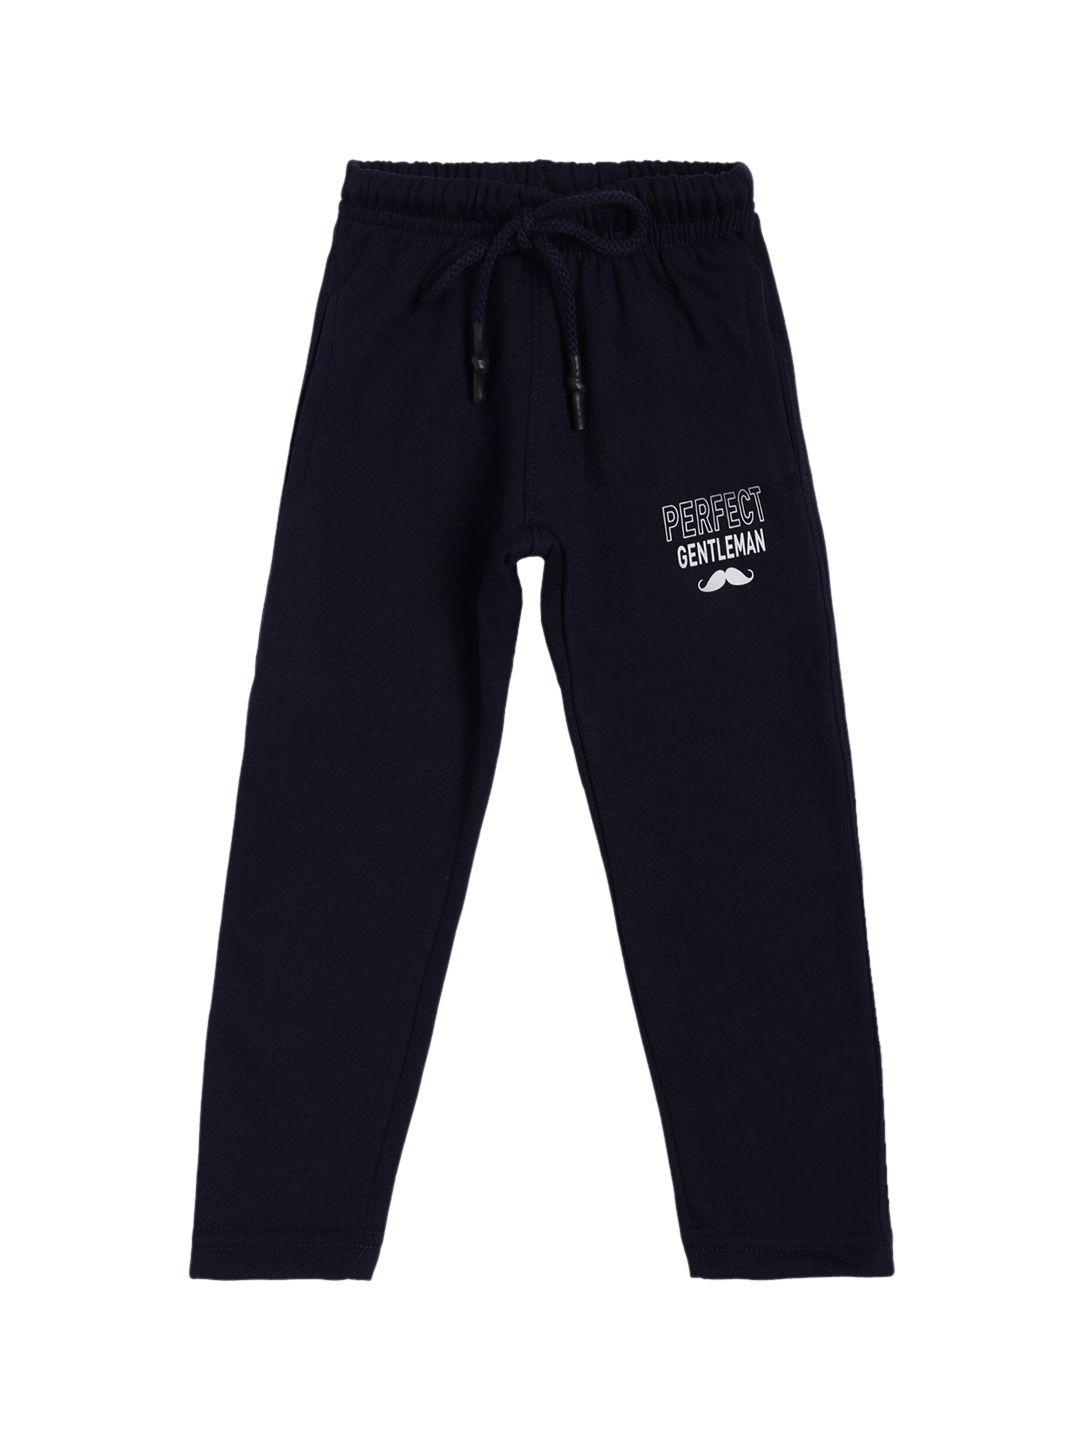 dyca boys navy blue solid knitted pure cotton track pants with typography print detail